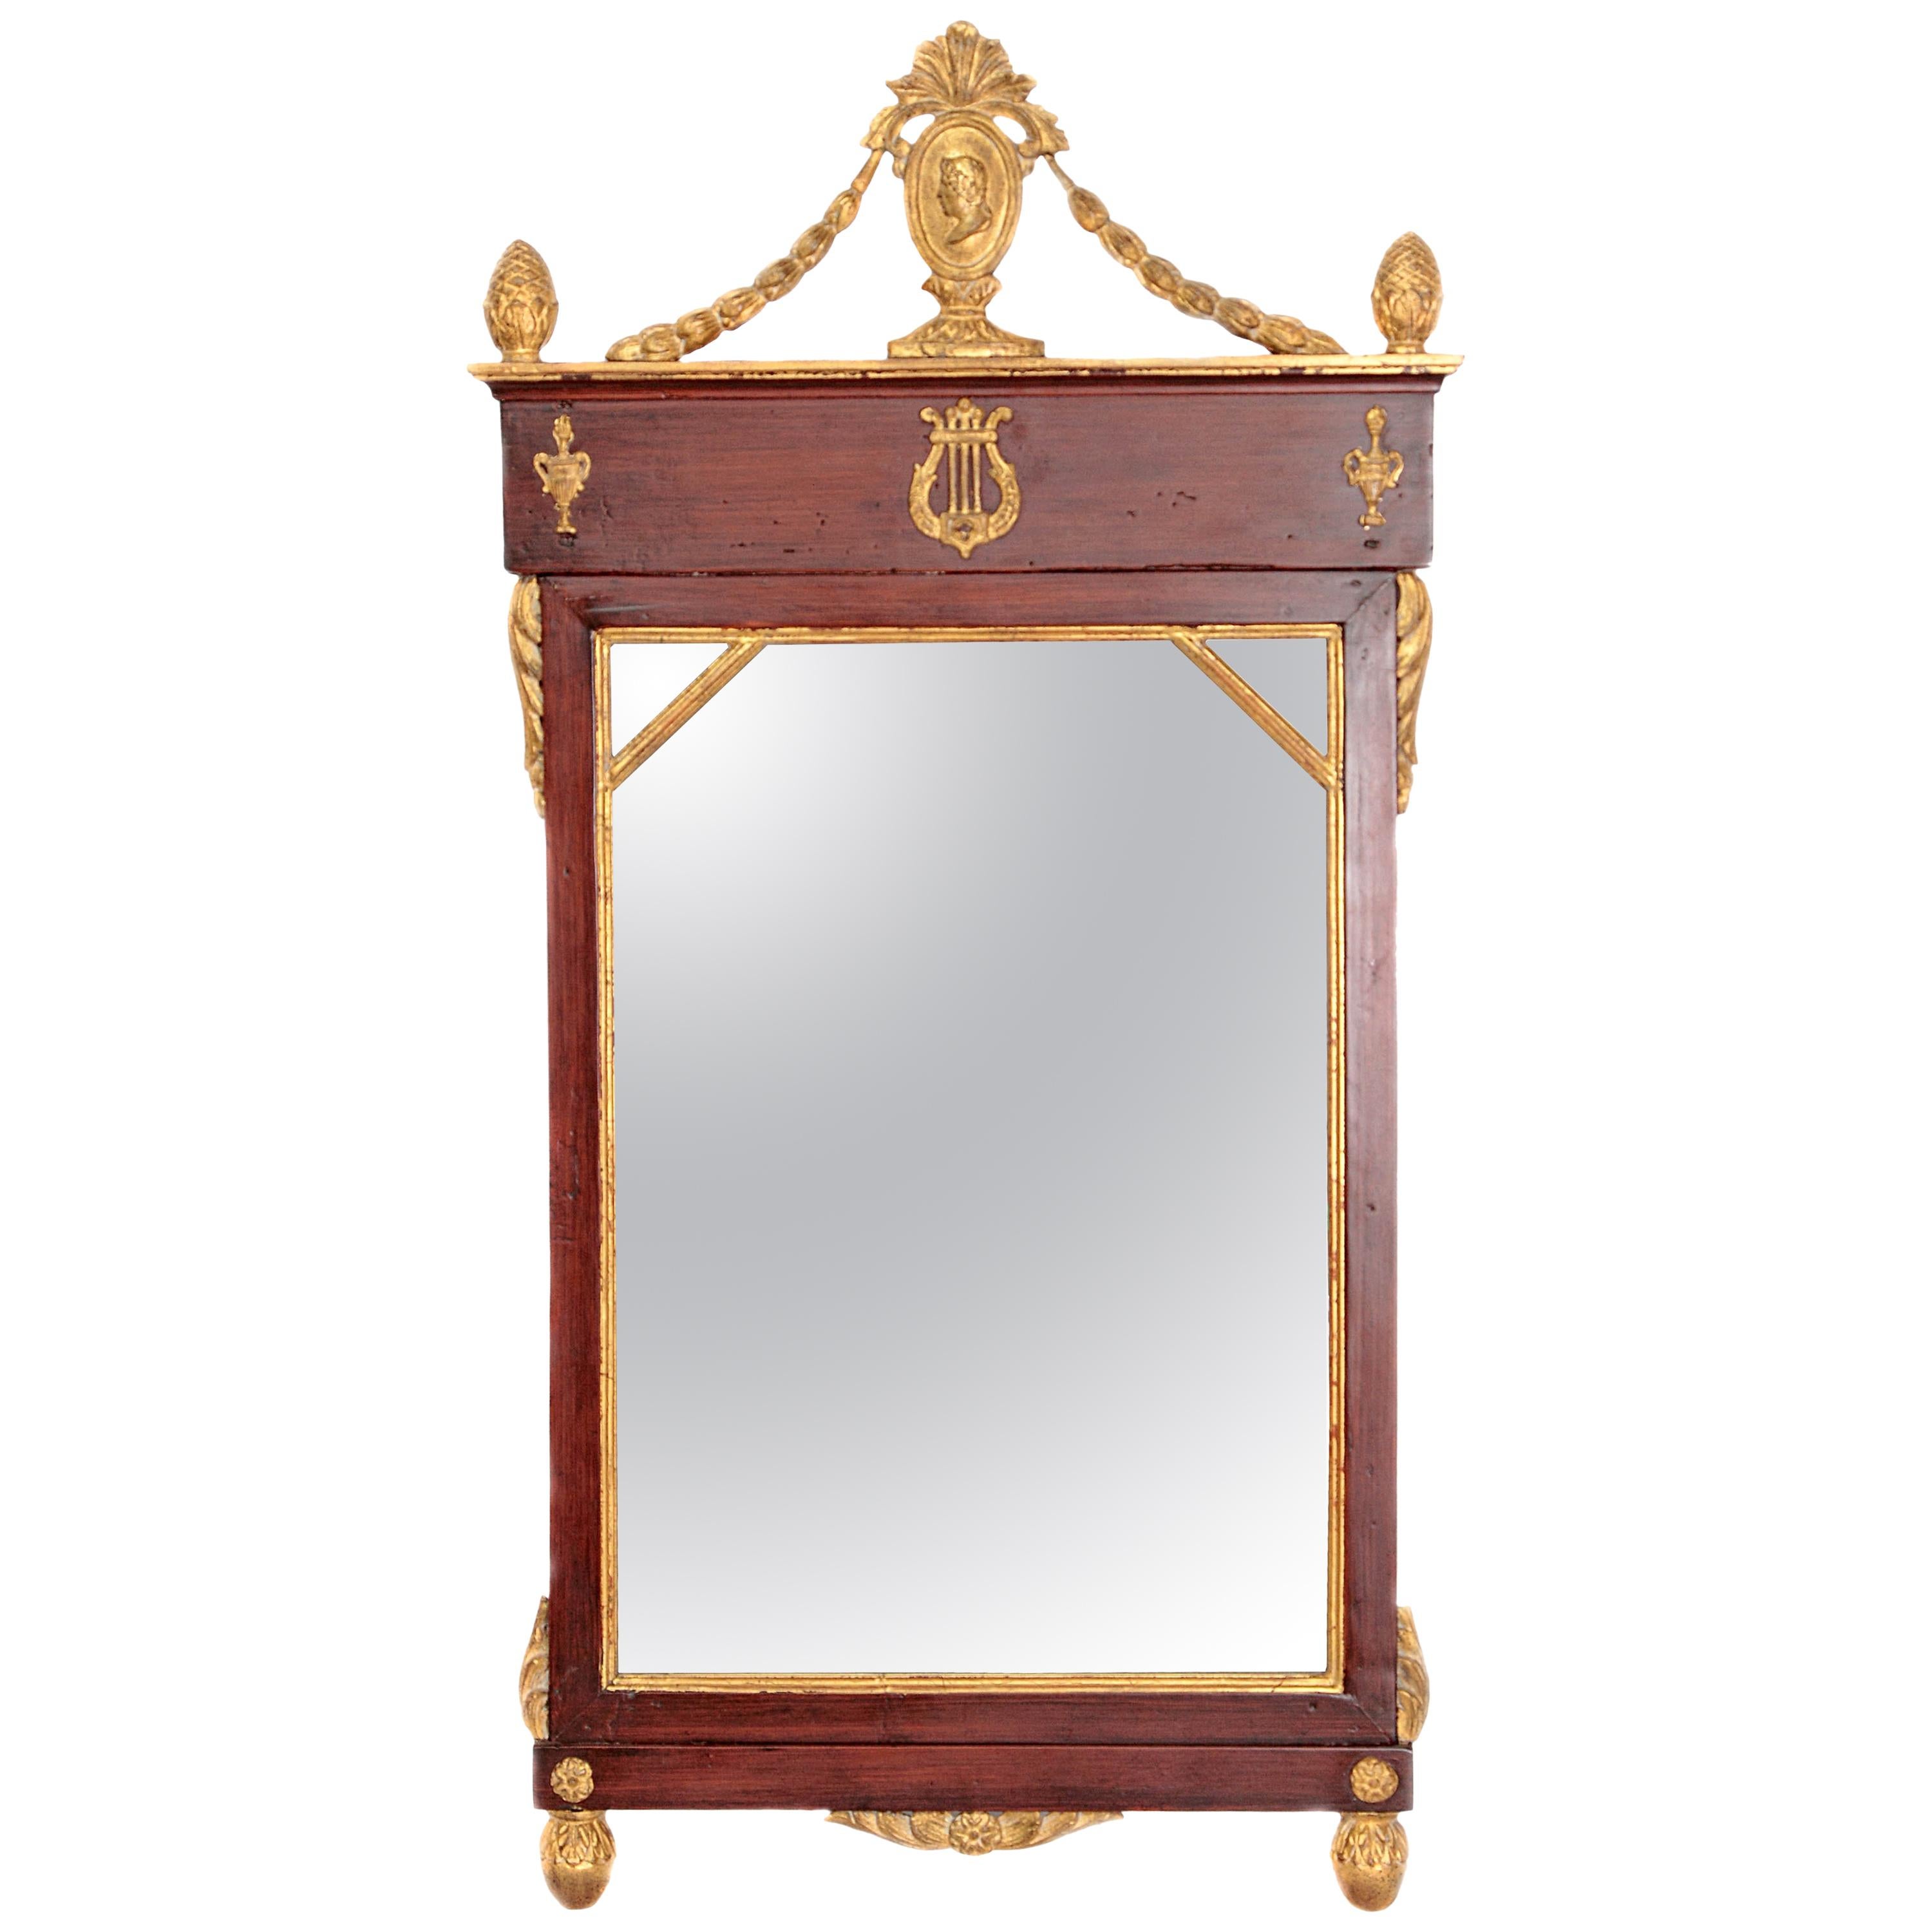 Early 19th Century Neoclassic Mirror